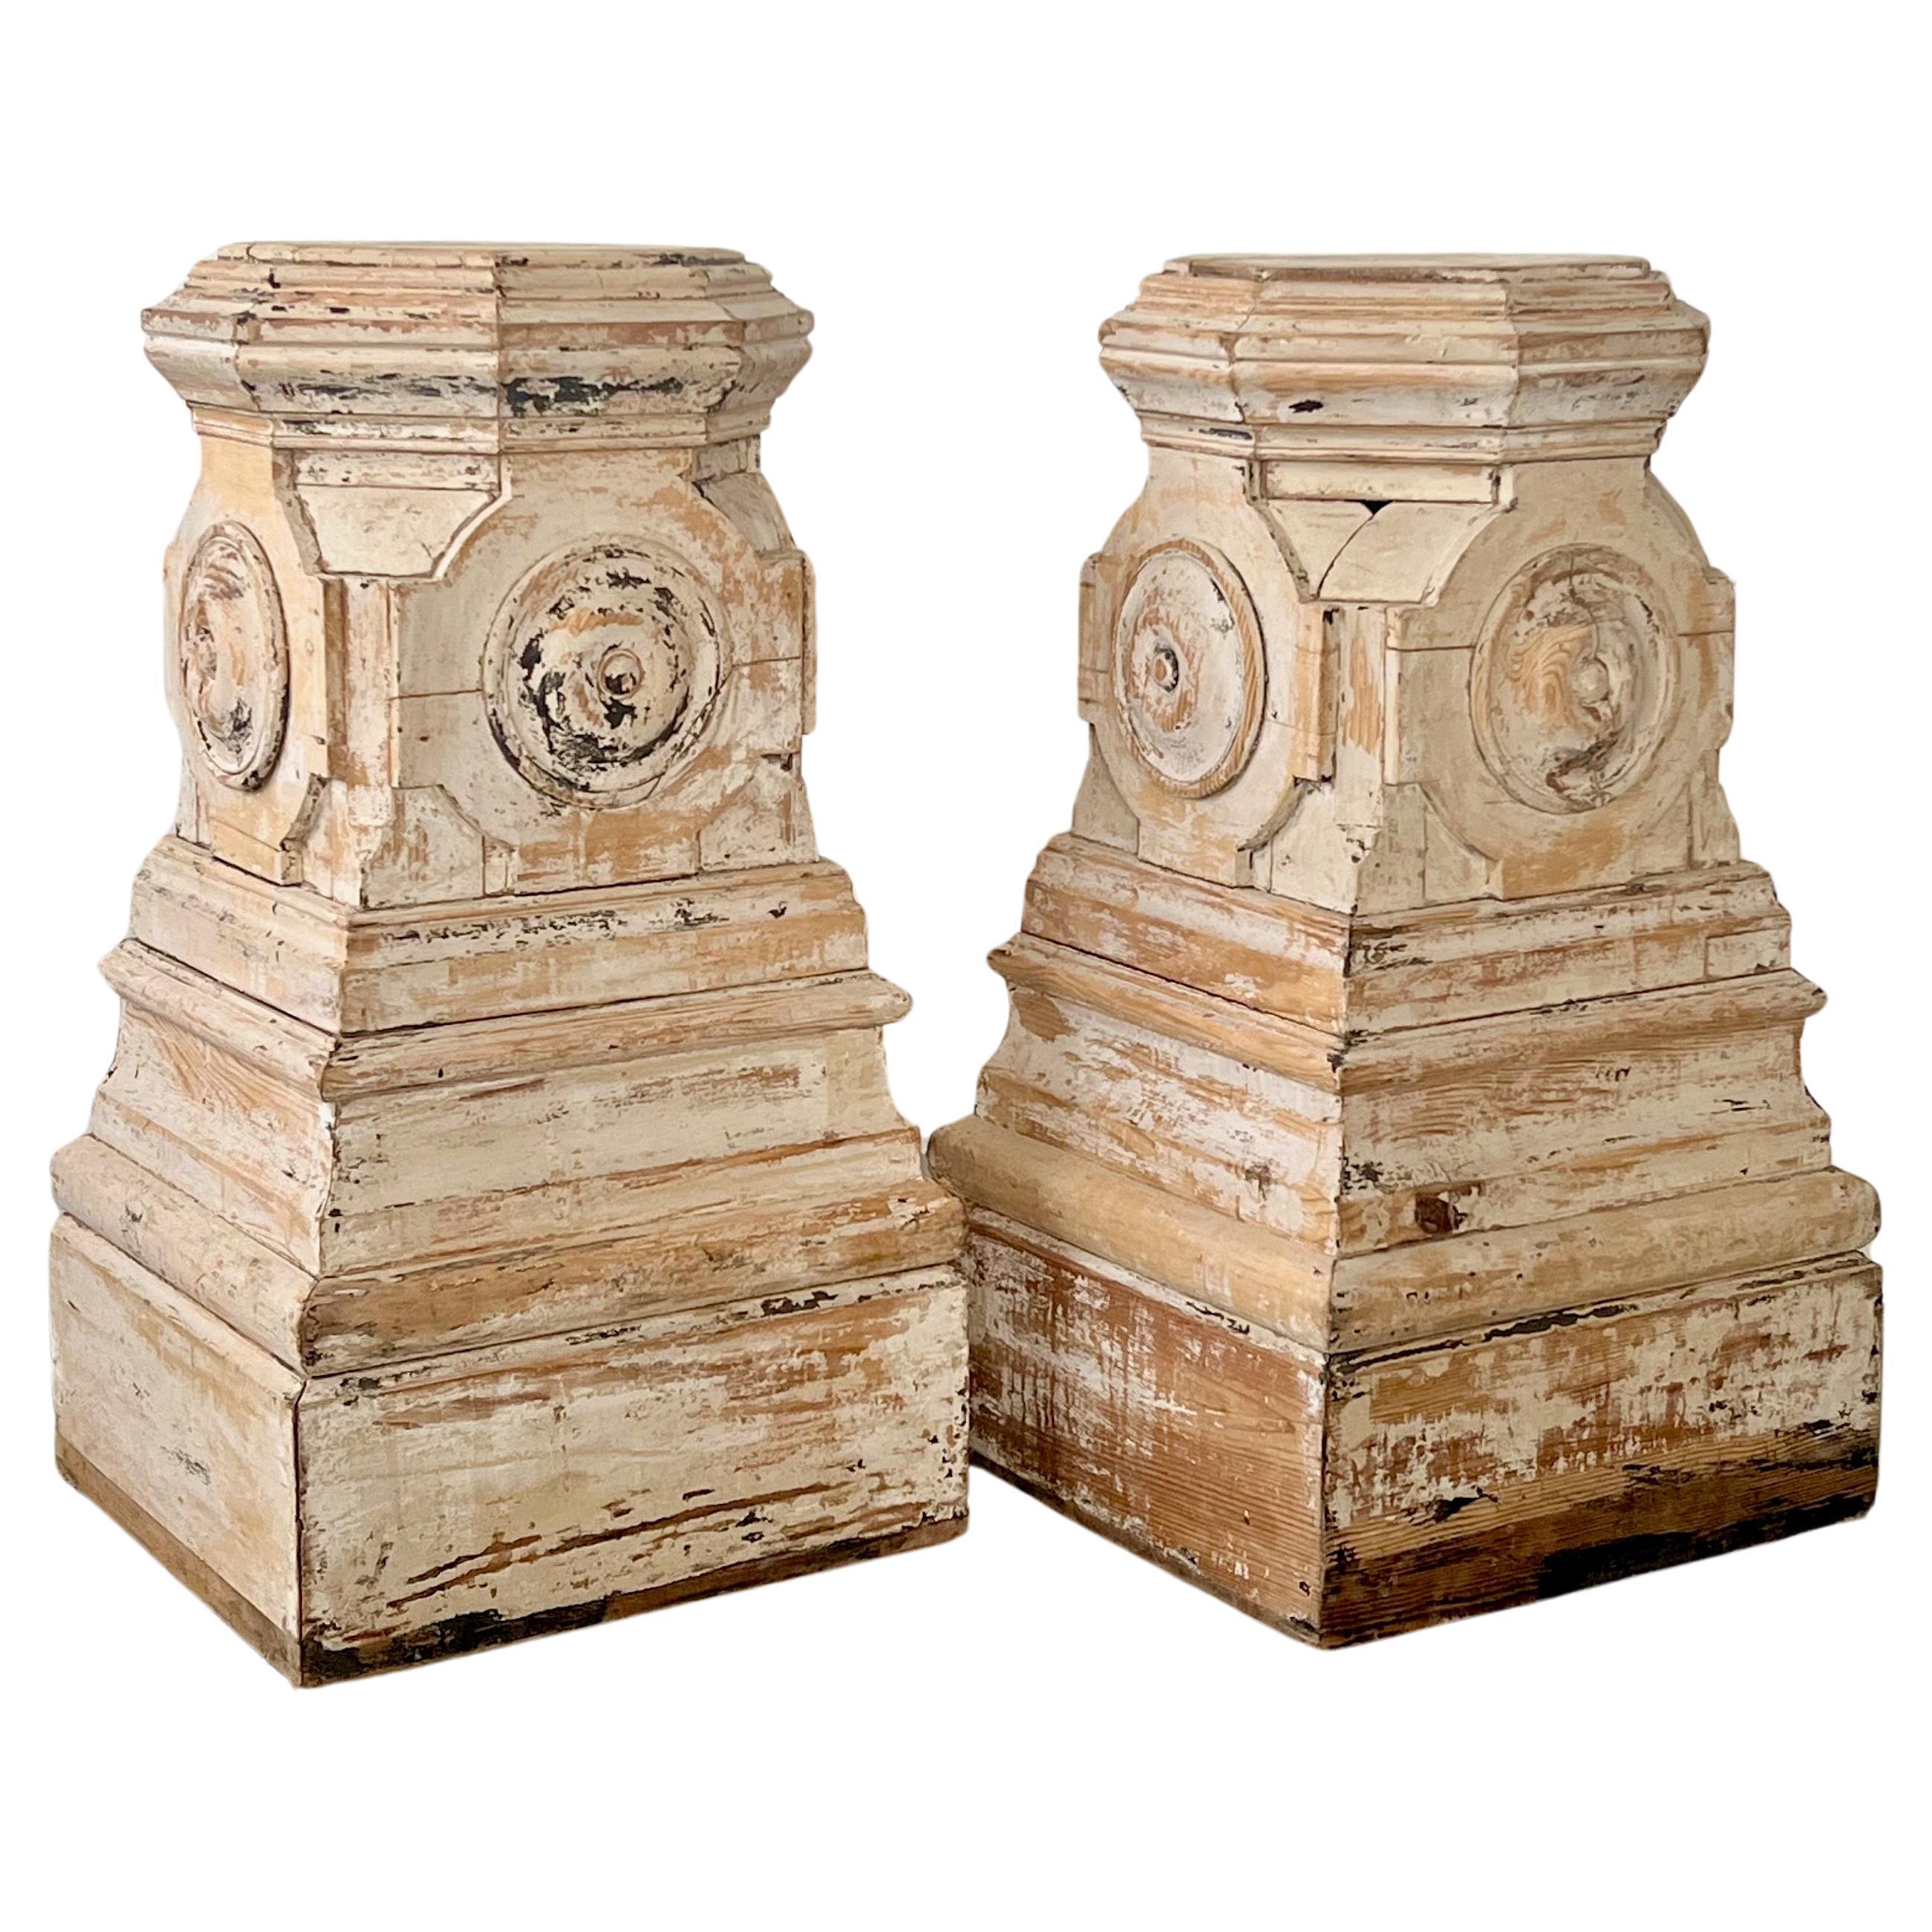 Pair of 19th century French Carved Wooden Pedestals For Sale